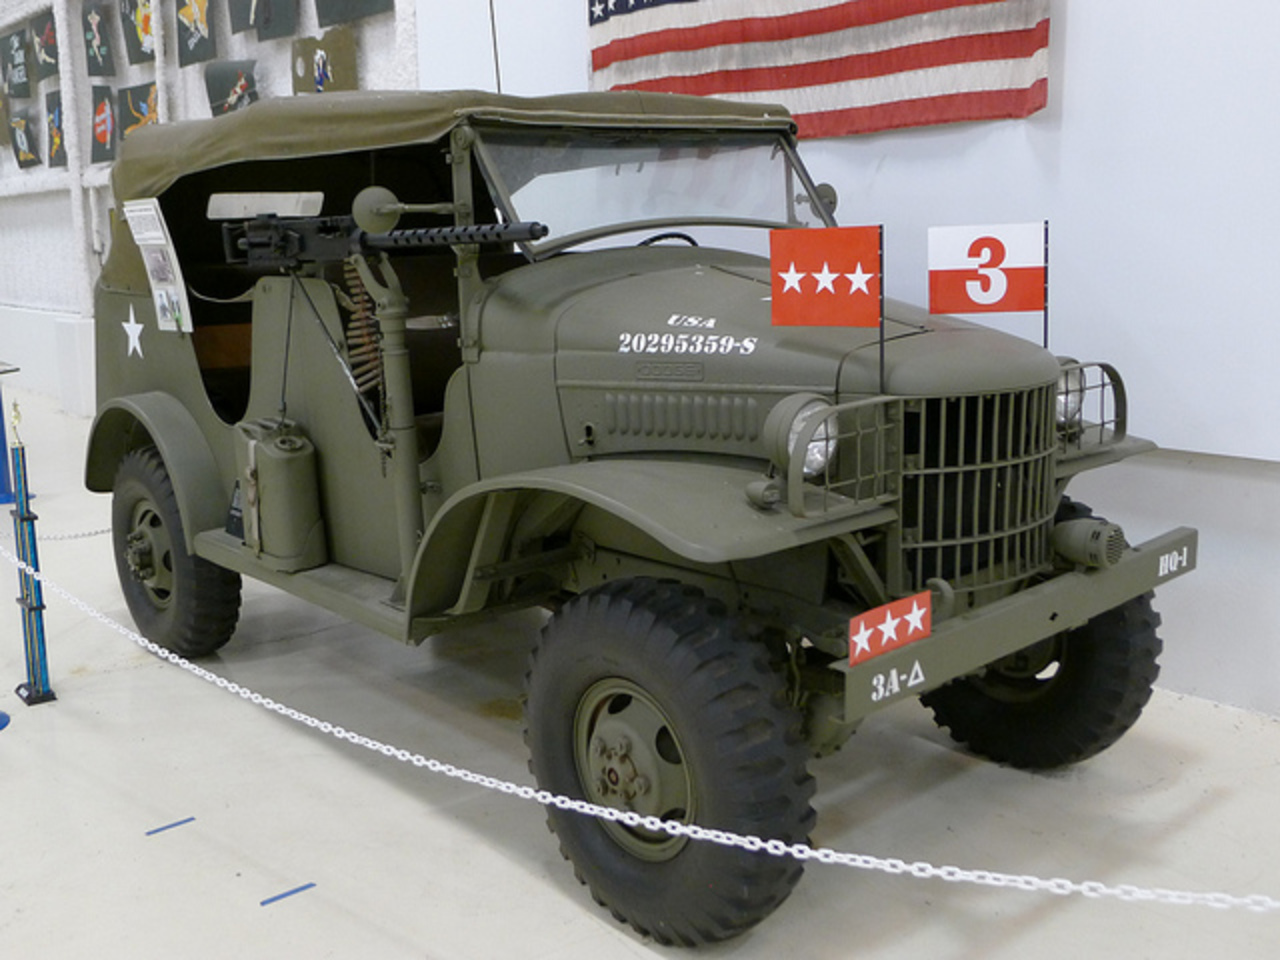 1942 Dodge Command Car | Flickr - Photo Sharing!